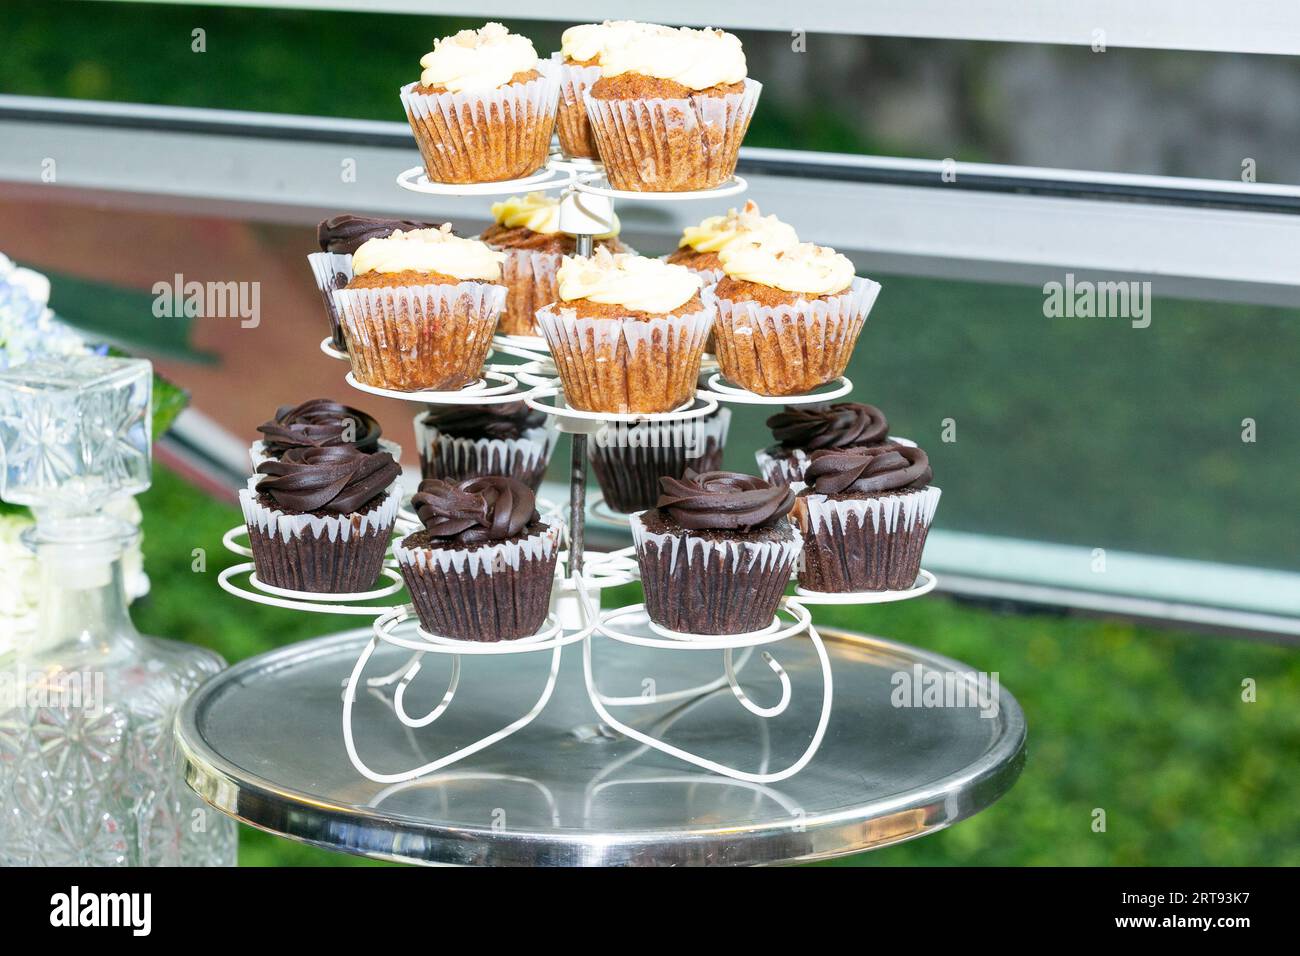 Social events; Individual Presentation Of Desserts For Guests At The Reception Stock Photo